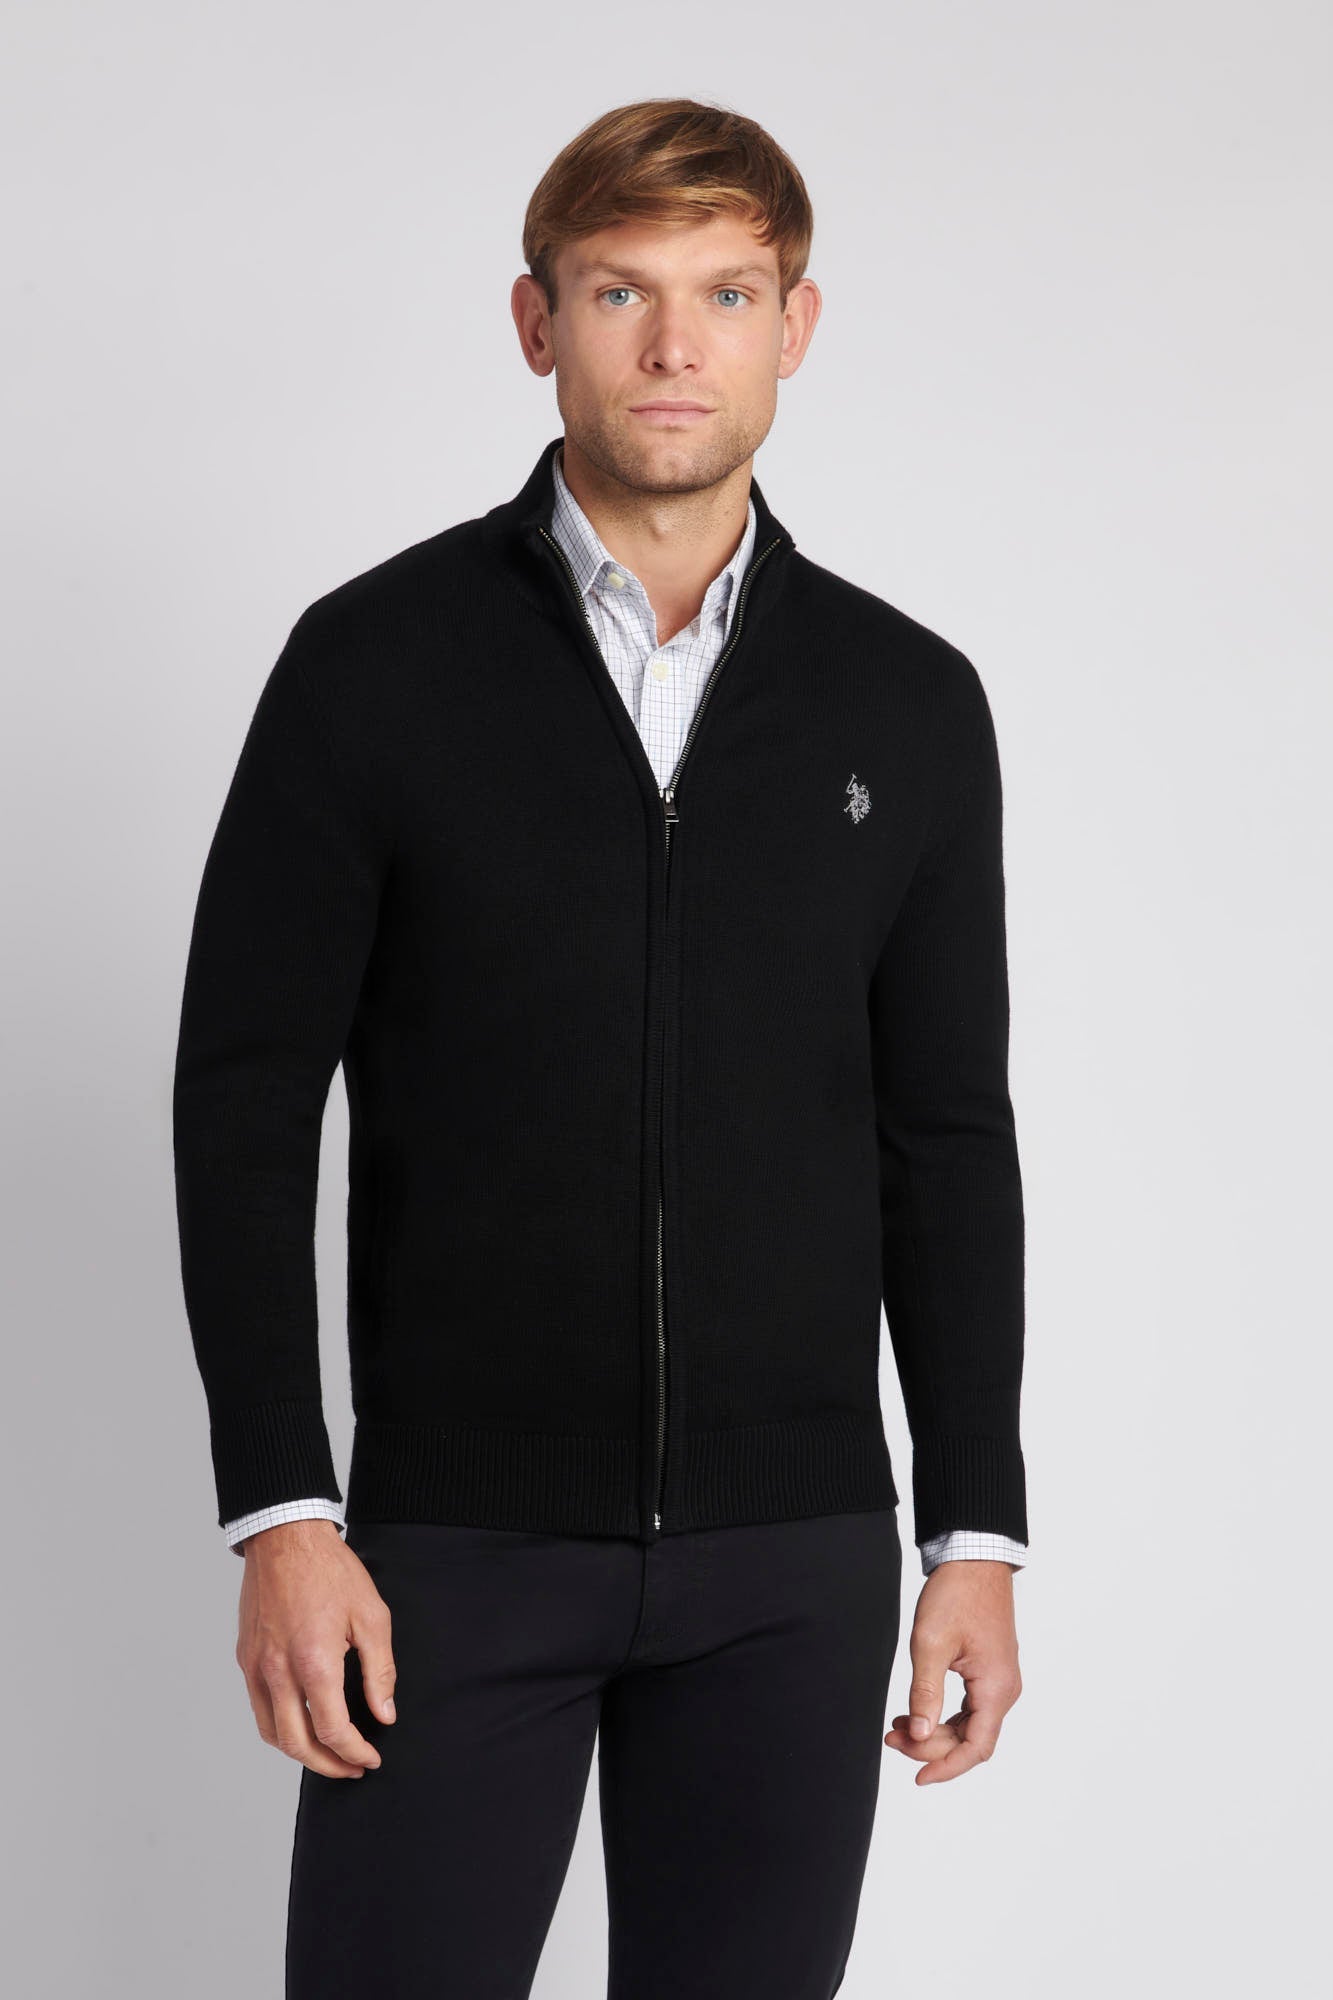 U.S. Polo Assn. Mens Knitted Cardigan in Black Steeple Grey DHM